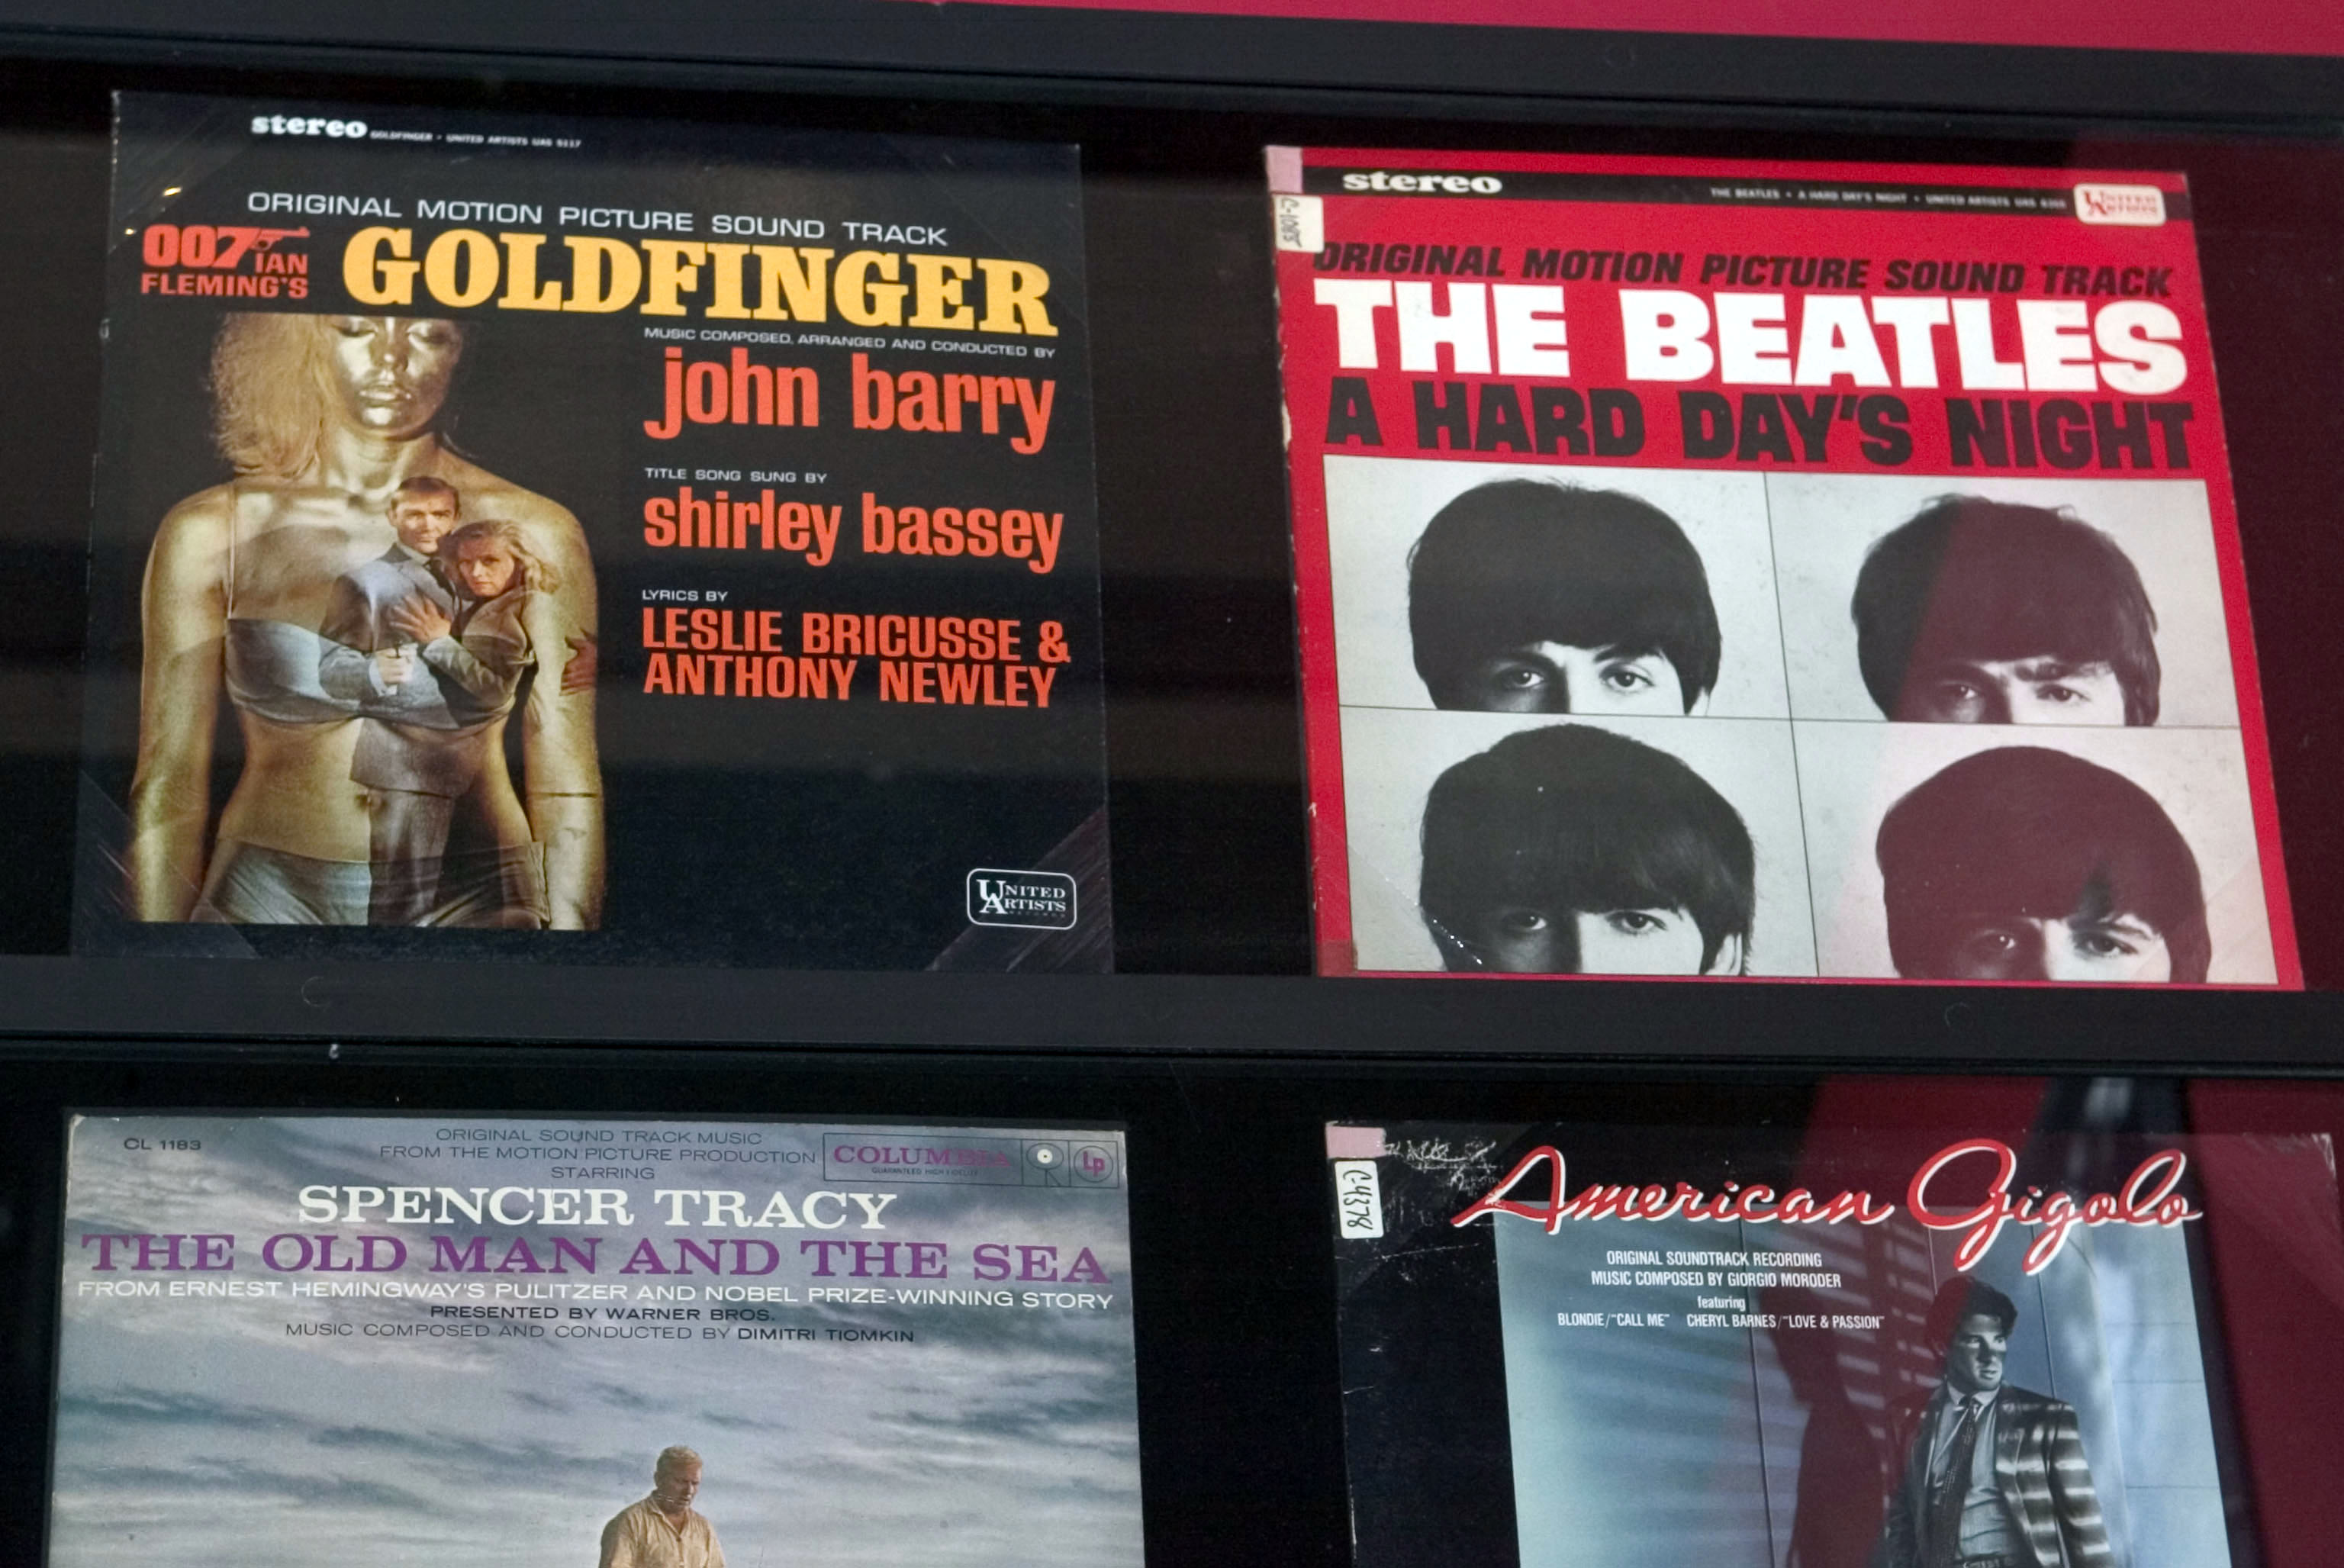 The soundtrack of the James Bond film 'Goldfinger' next to The Beatles' 'A Hard Day's Night' on a shelf